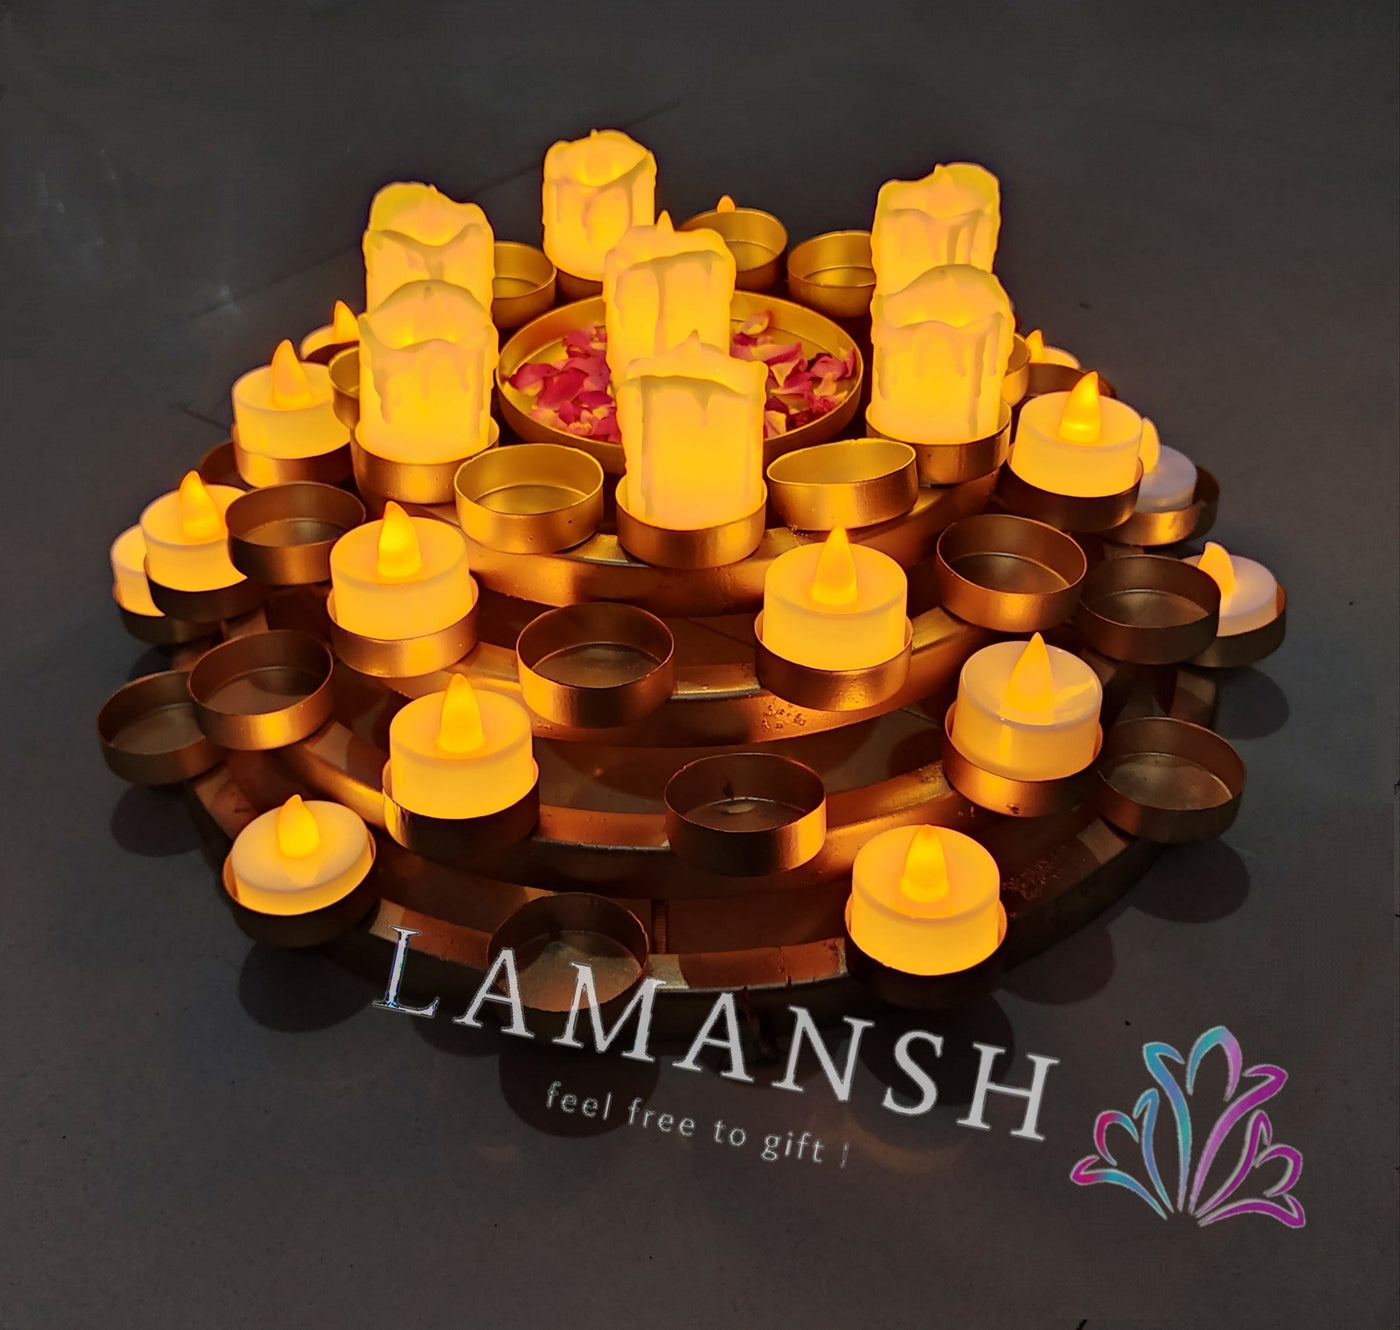 Lamansh Candle Holders LAMANSH® (1.2 feet length) 5 Layer Decorative Metal Rangoli Diya Tealight Candle 🪔 holder stand /Diya stand Metal Handicraft for corporate & festival gifting 🎁 / Home decor product for Diwali ( candles not included )